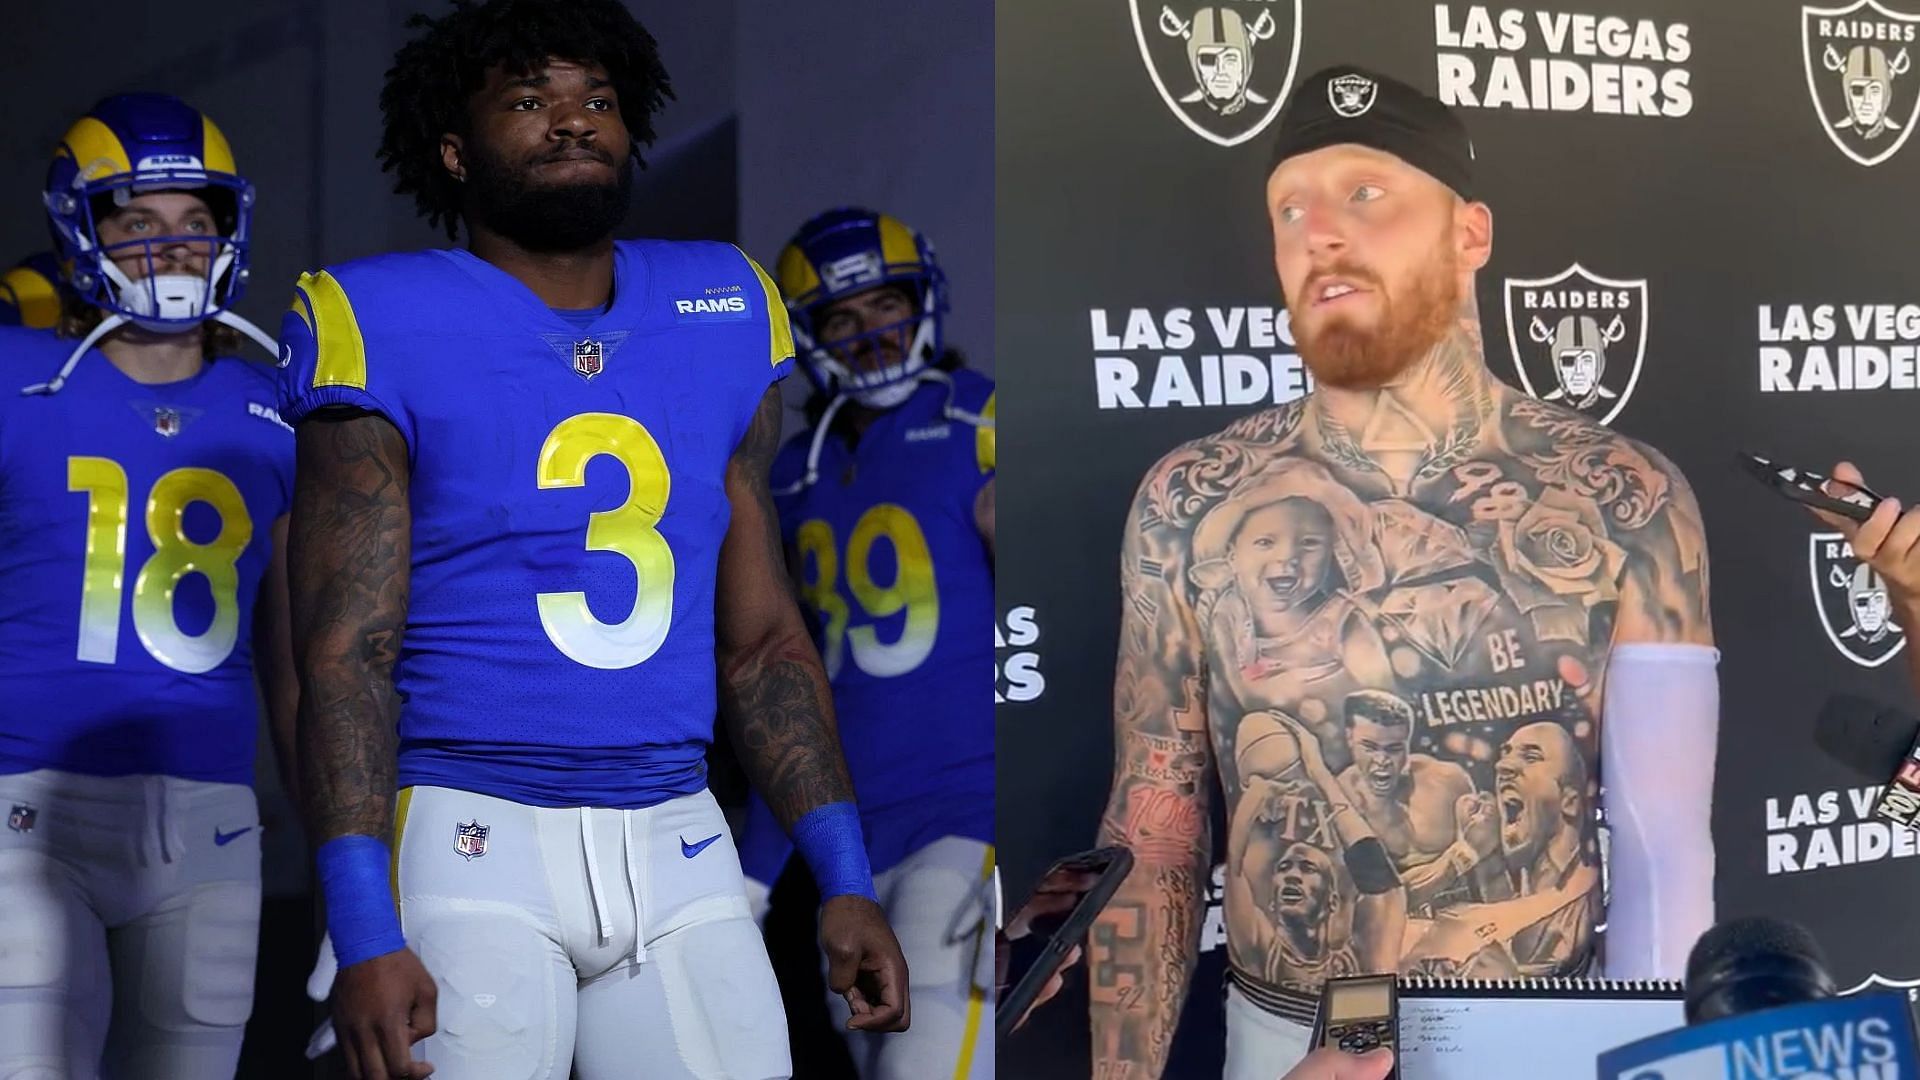 Fans mock Maxx Crosby for excessive tattoos following Cam Akers fight -  “Going all in on looking like a Raider”